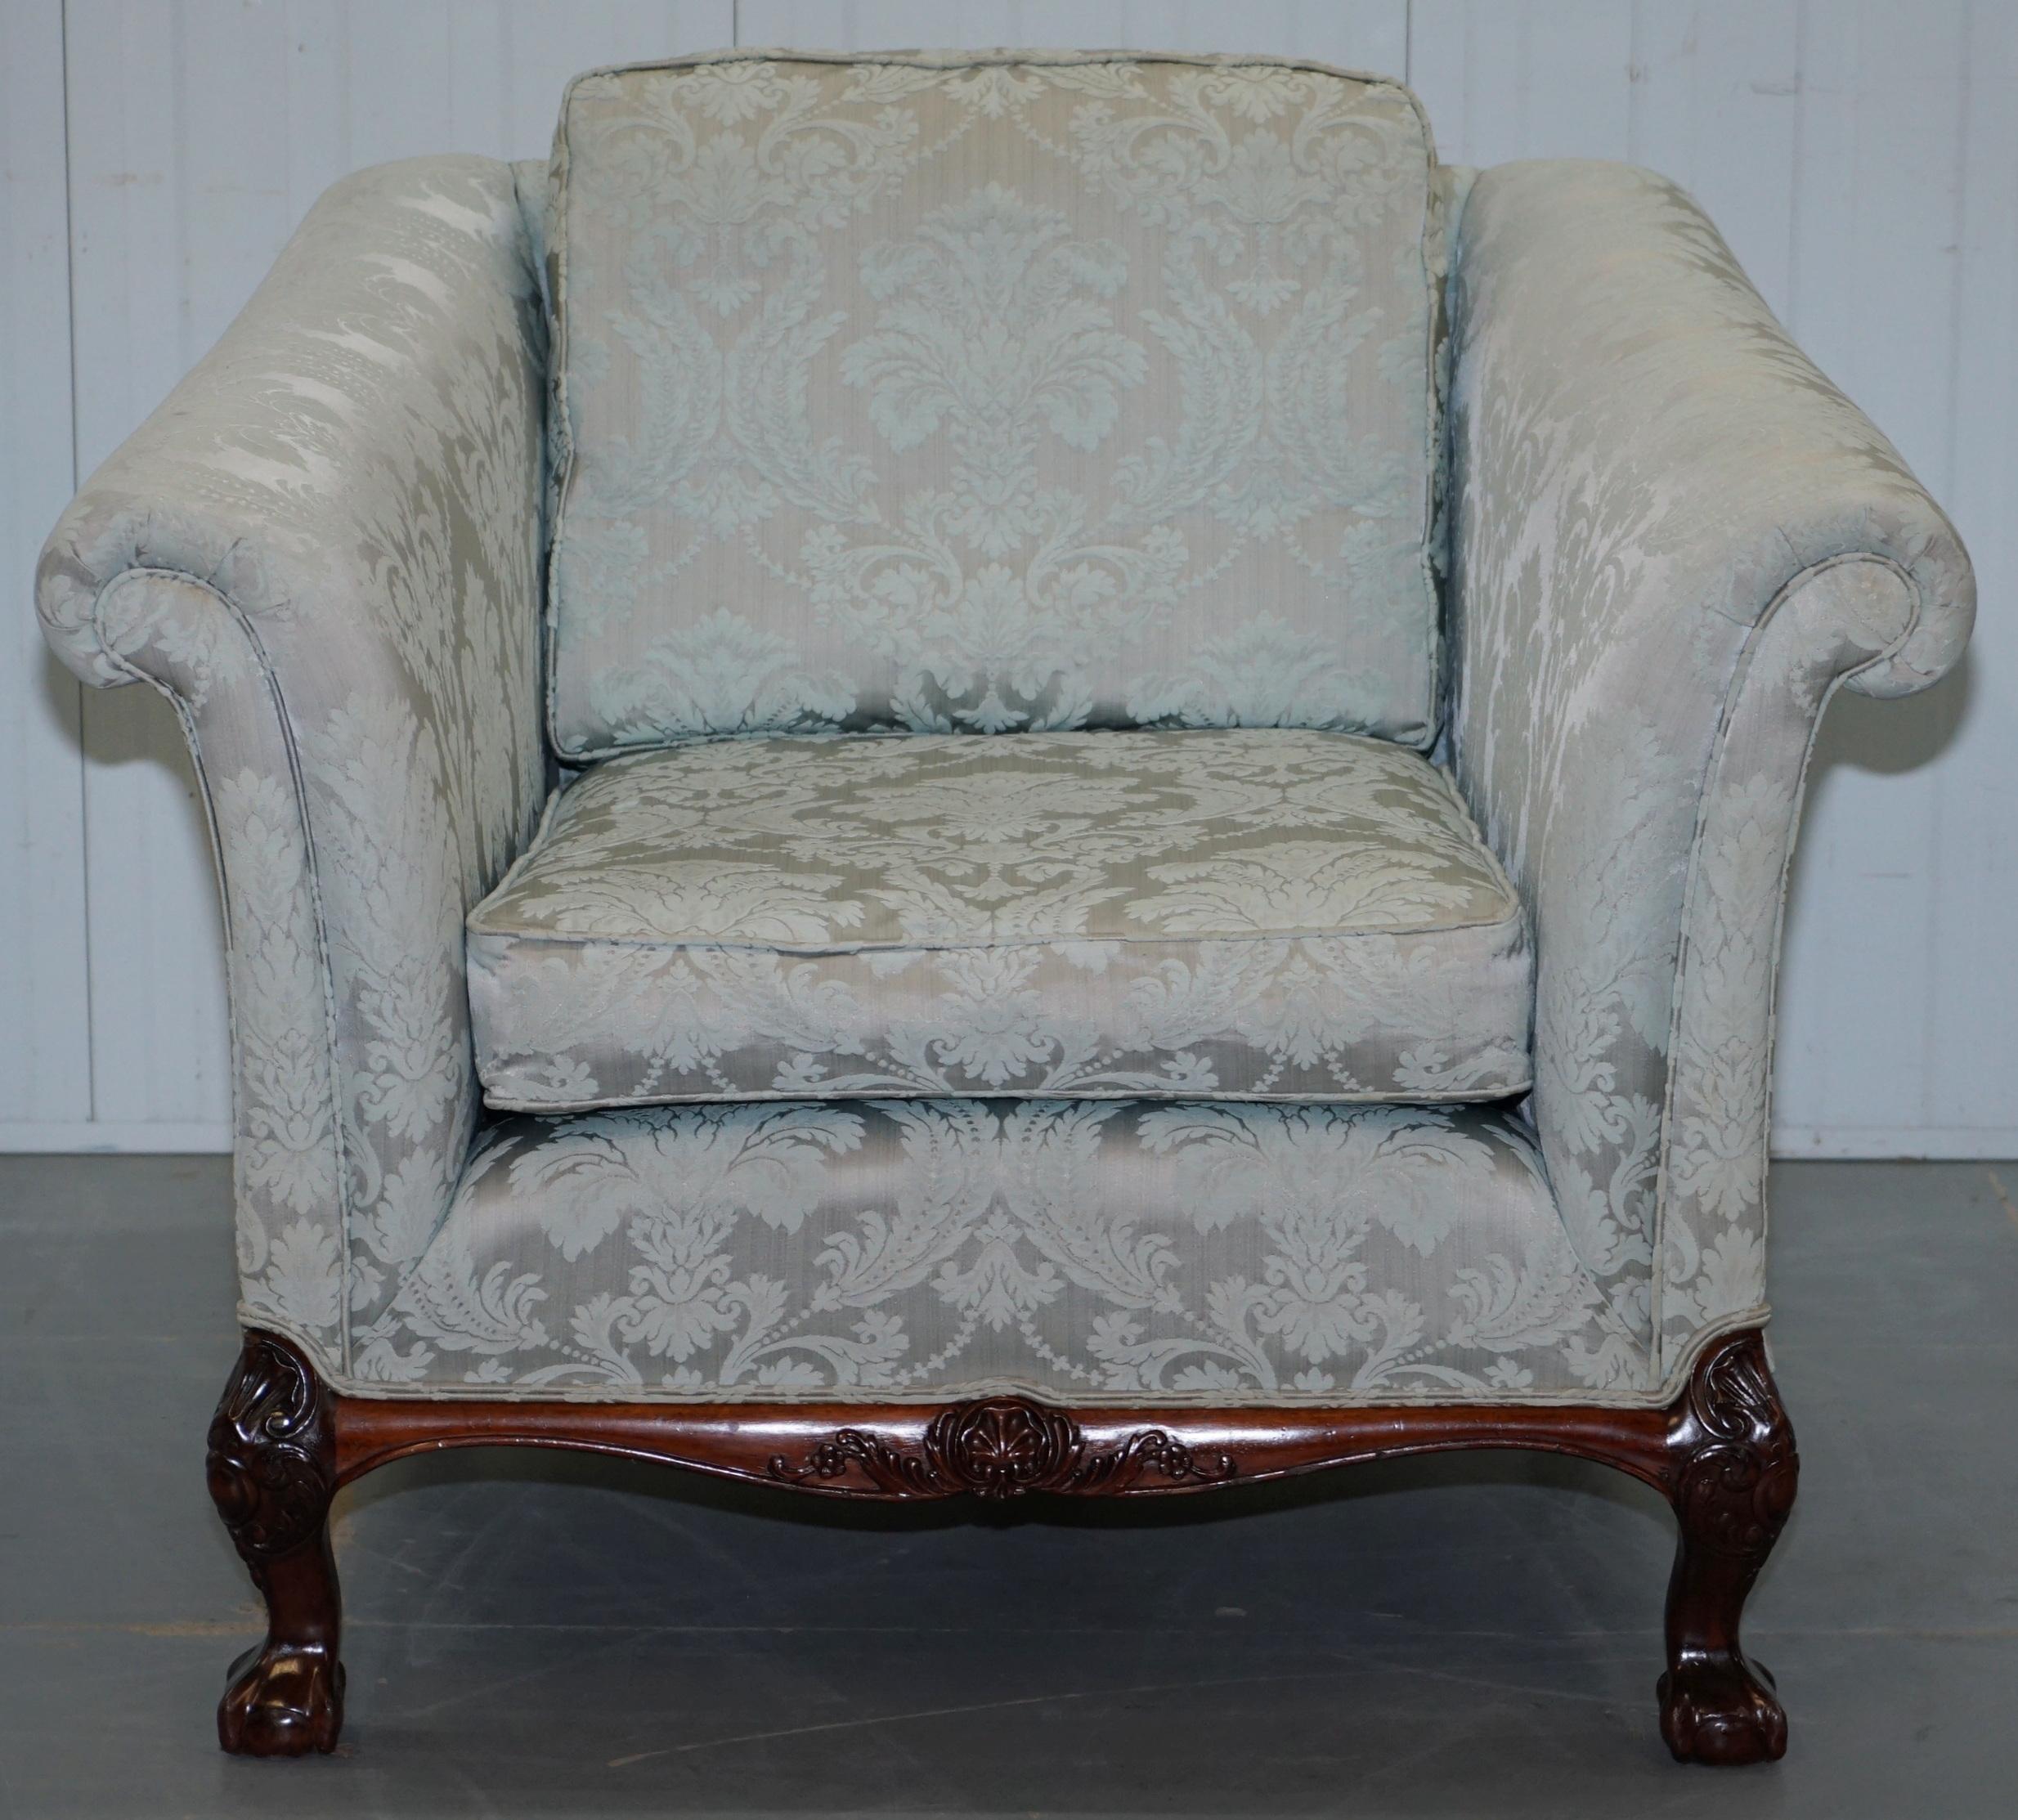 Lovely Brights of Nettlebed Three Piece Sofa & Armchair Suite Damask Upholstery 10